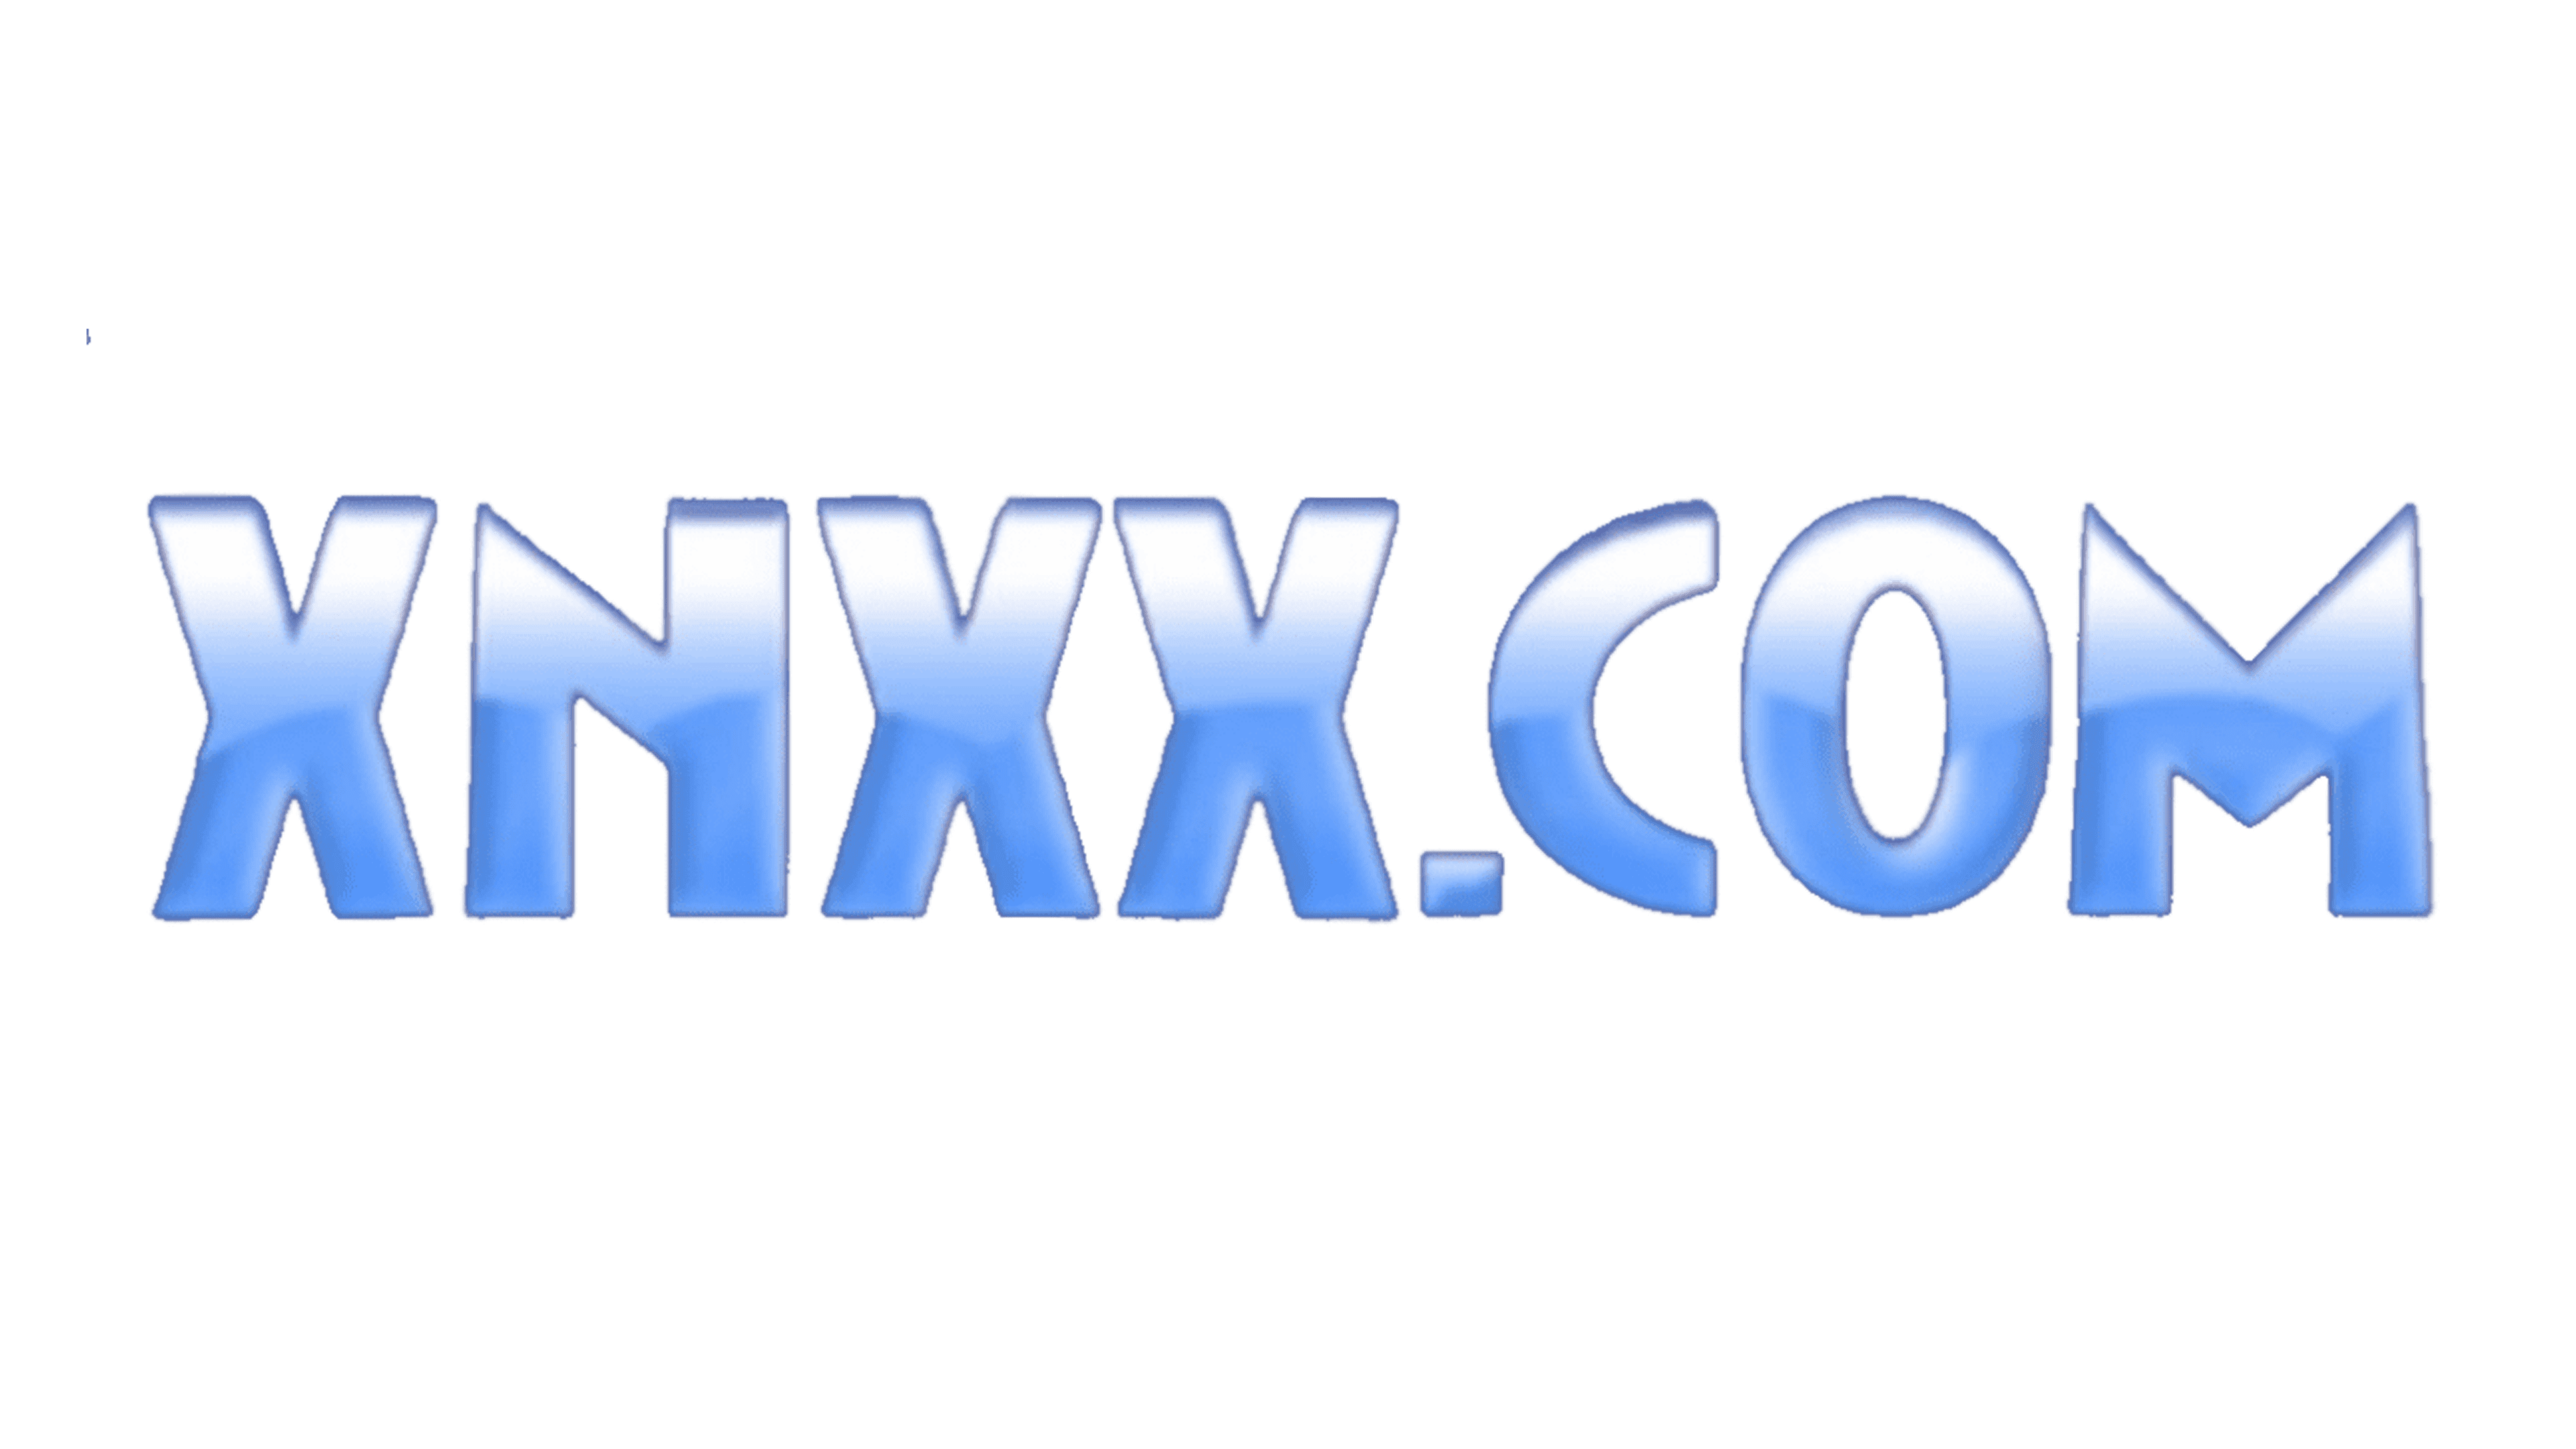 Xnxx Video Converter - XNXX Logo and symbol, meaning, history, PNG, brand